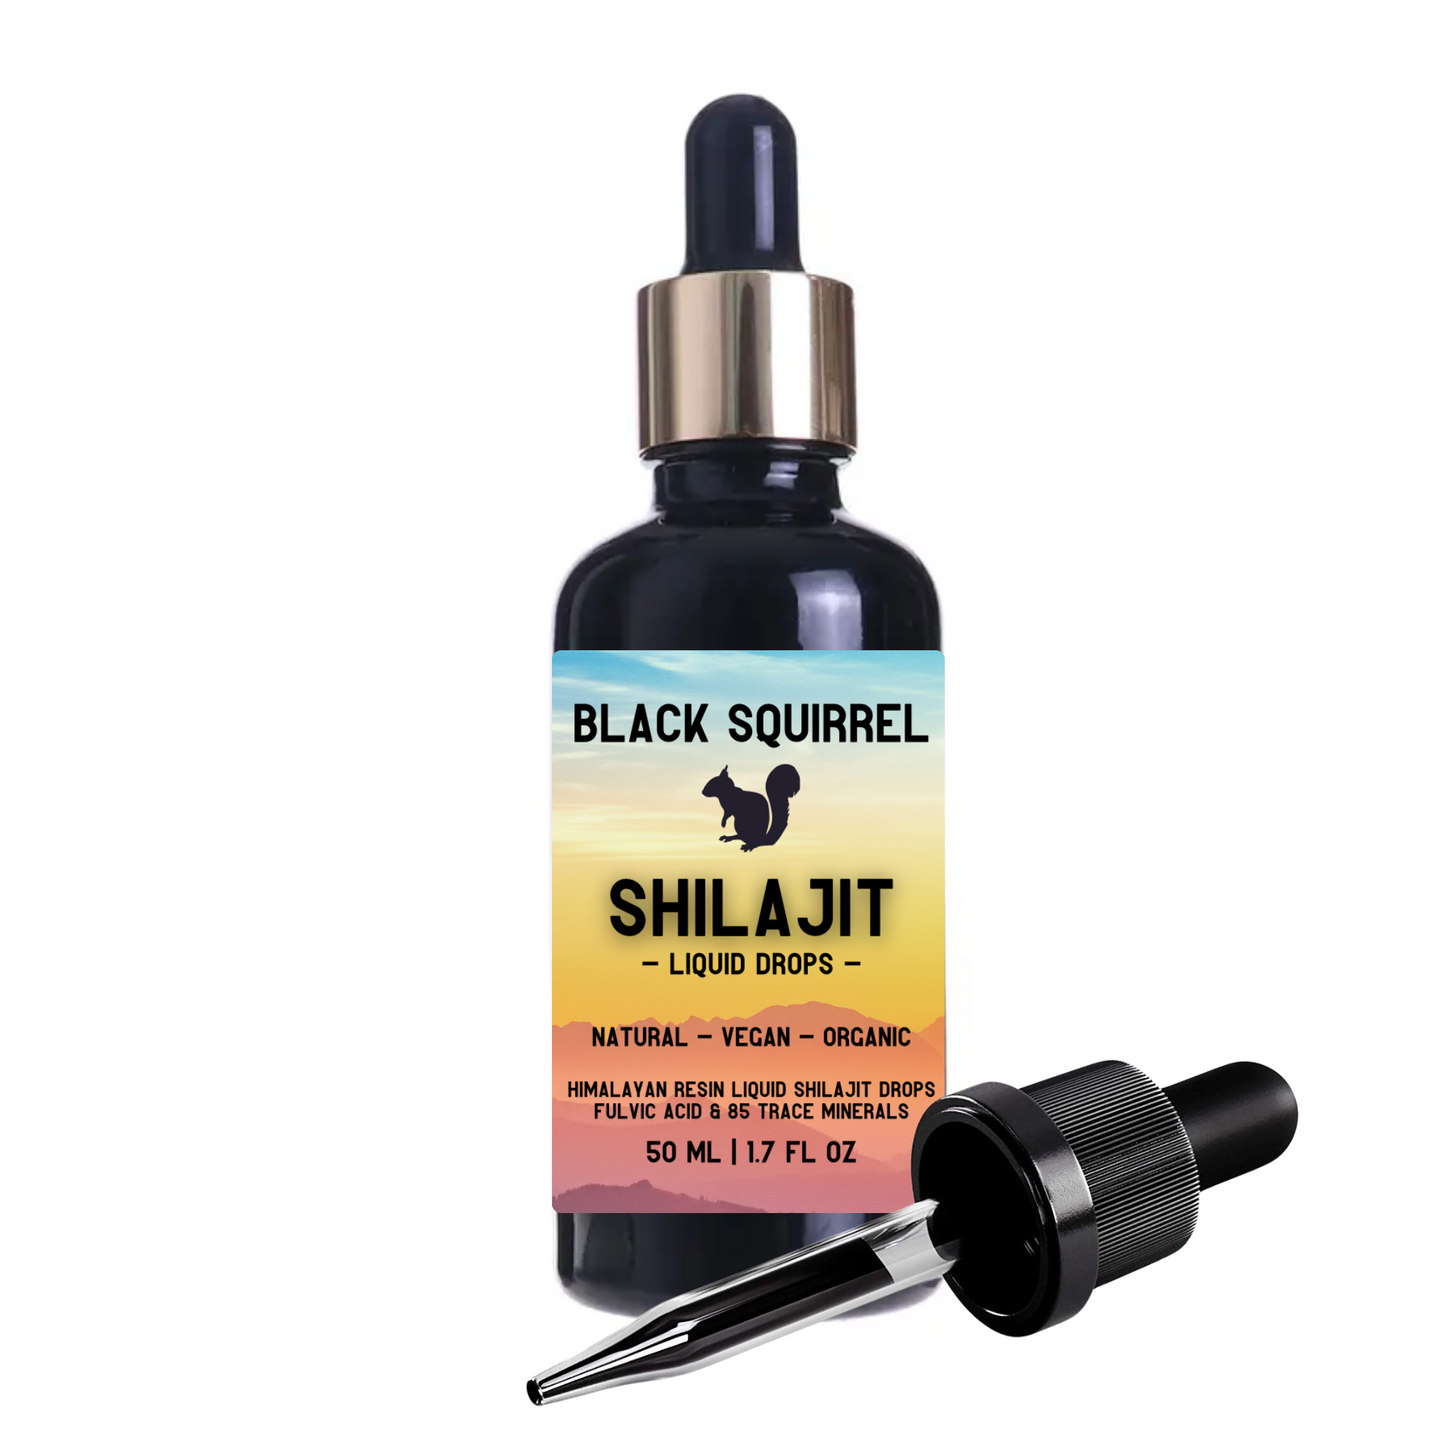 Buy Black Squirrel Shilajit. Pure, Potent, Himalayan Liquid Drops 50ml - Black Squirrel Pure Potent Shilajit. High Strength, Himalayan Liquid Drops 50ml with Dropper. Authentic, Fulvic Acid & Natural Trace Mineral Complex. Organic & Vegan. A vegan-friendly, gluten-free, non-GMO, all natural & contains no artificial ingredients. It's loaded with more than 85 essential minerals & humic / fulvic acids, it helps with altitude sickness & boosts cognitive abilities. It also reduces inflammation, strengthens the i